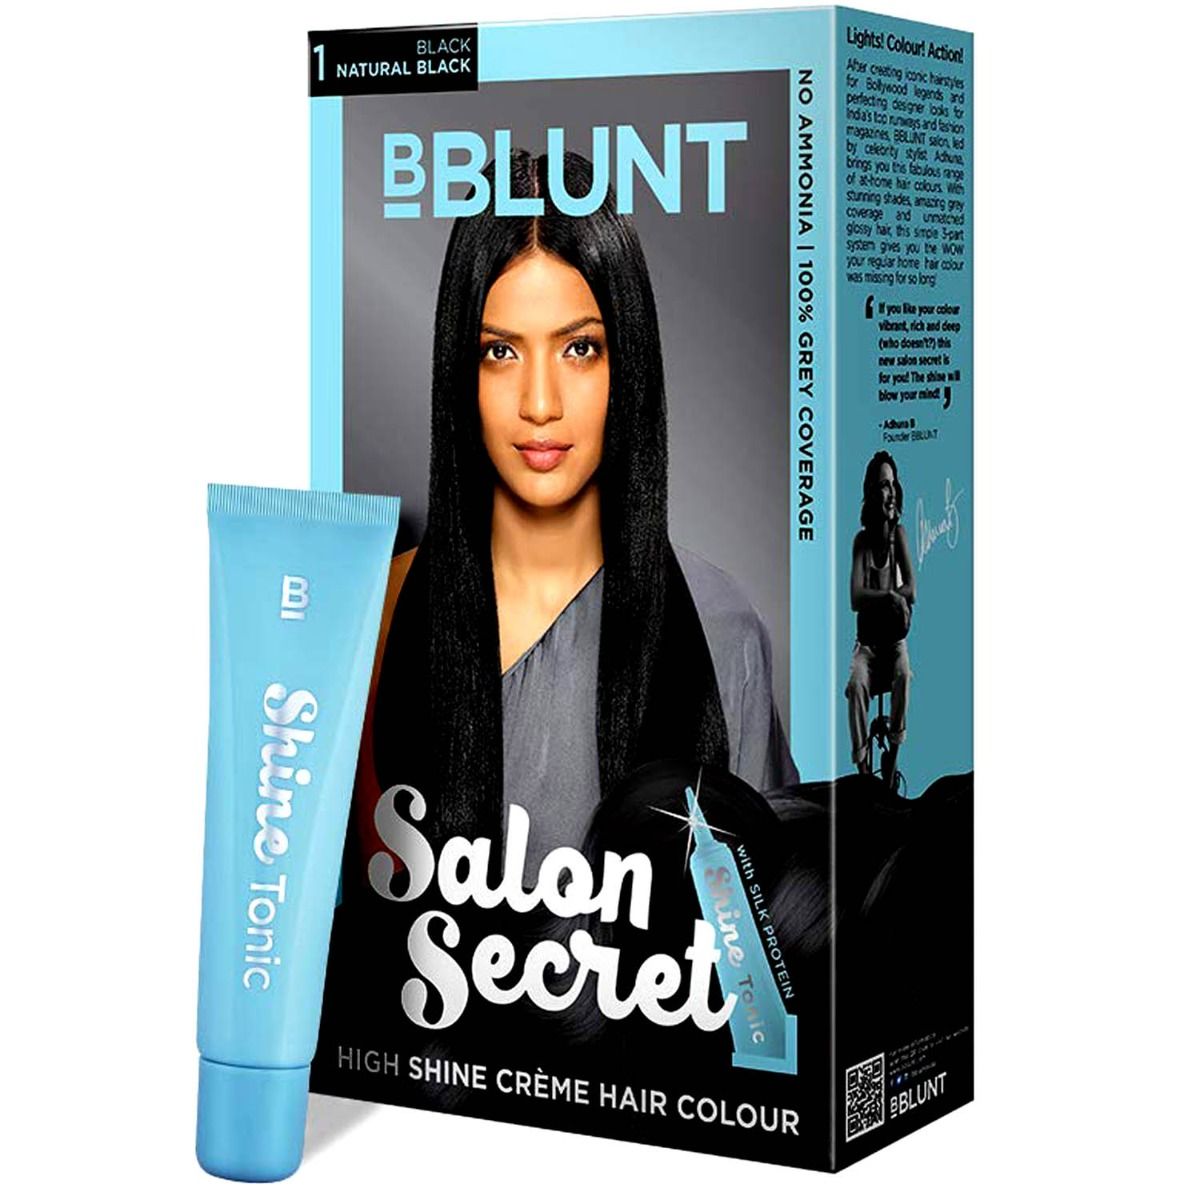 BBLUNT Salon Secret High Shine Creme Hair Colour , Black Natural Black 1,  100 gm with Shine Tonic, 8 ml Price, Uses, Side Effects, Composition -  Apollo Pharmacy